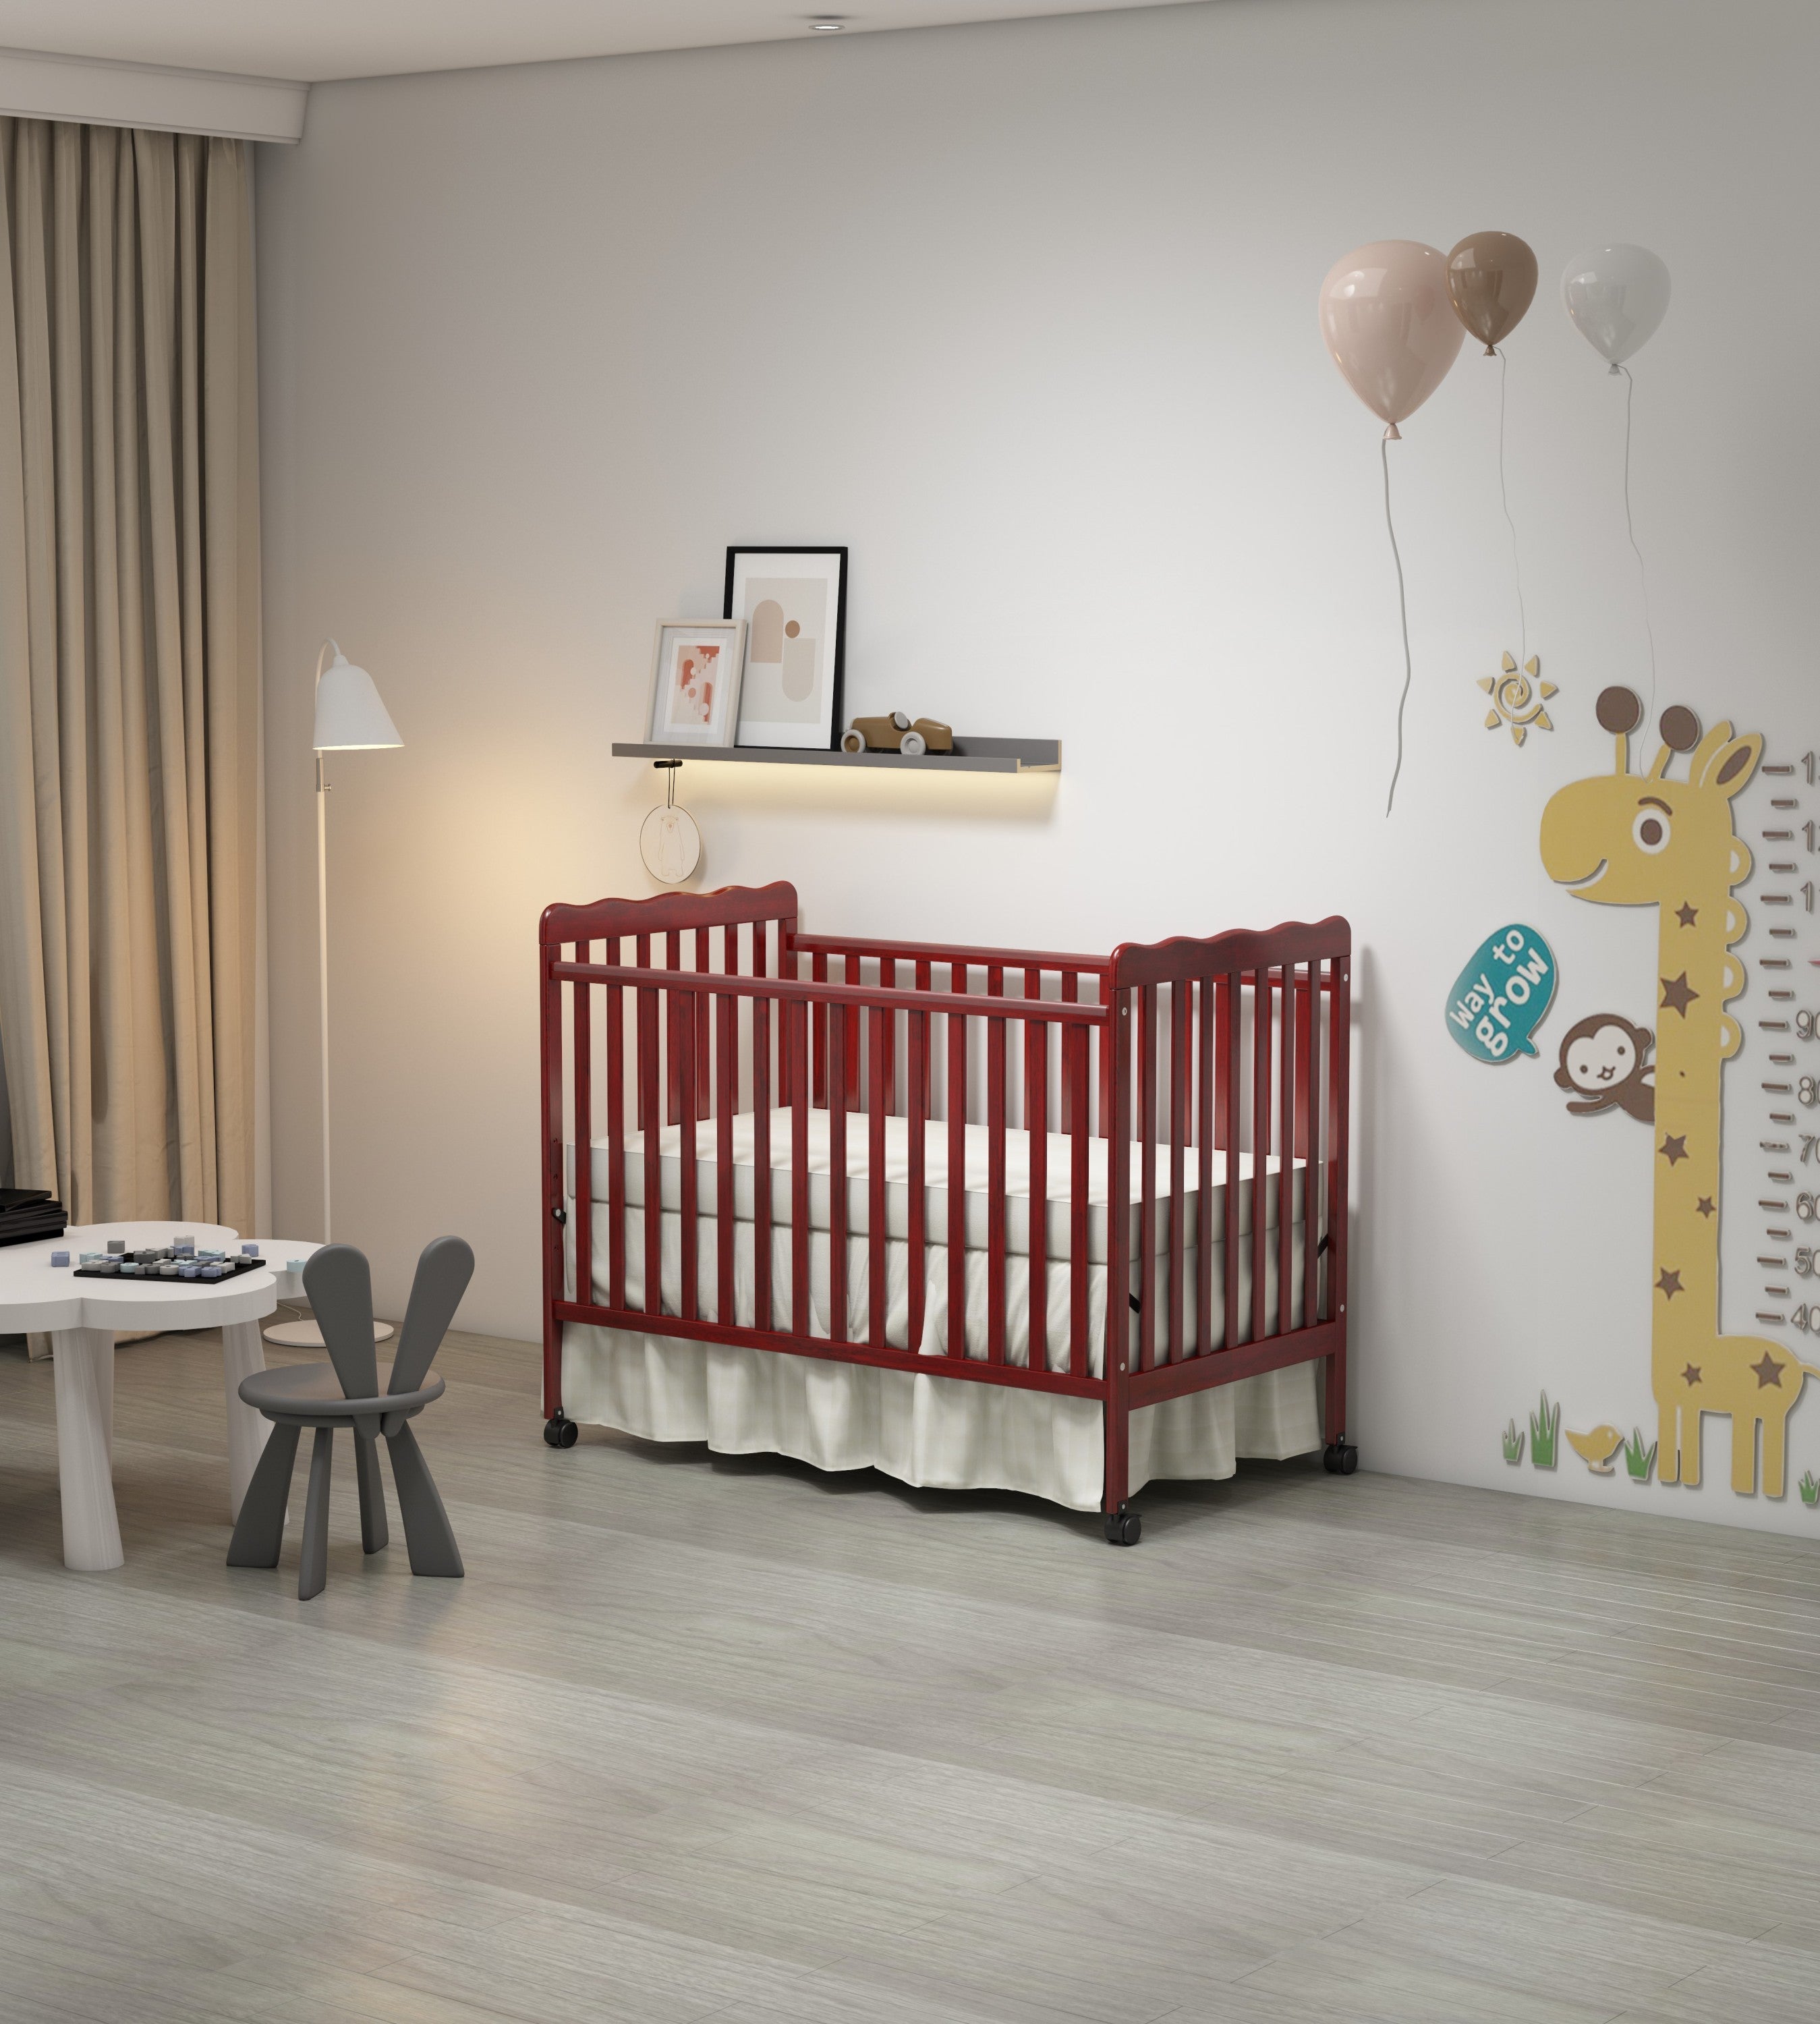 3-In-1 Convertible Crib In Cherry, Made Of Sustainable Pinewood, Non-Toxic Finish, Comes With Locking Wheels, Wooden Nursery Furniture